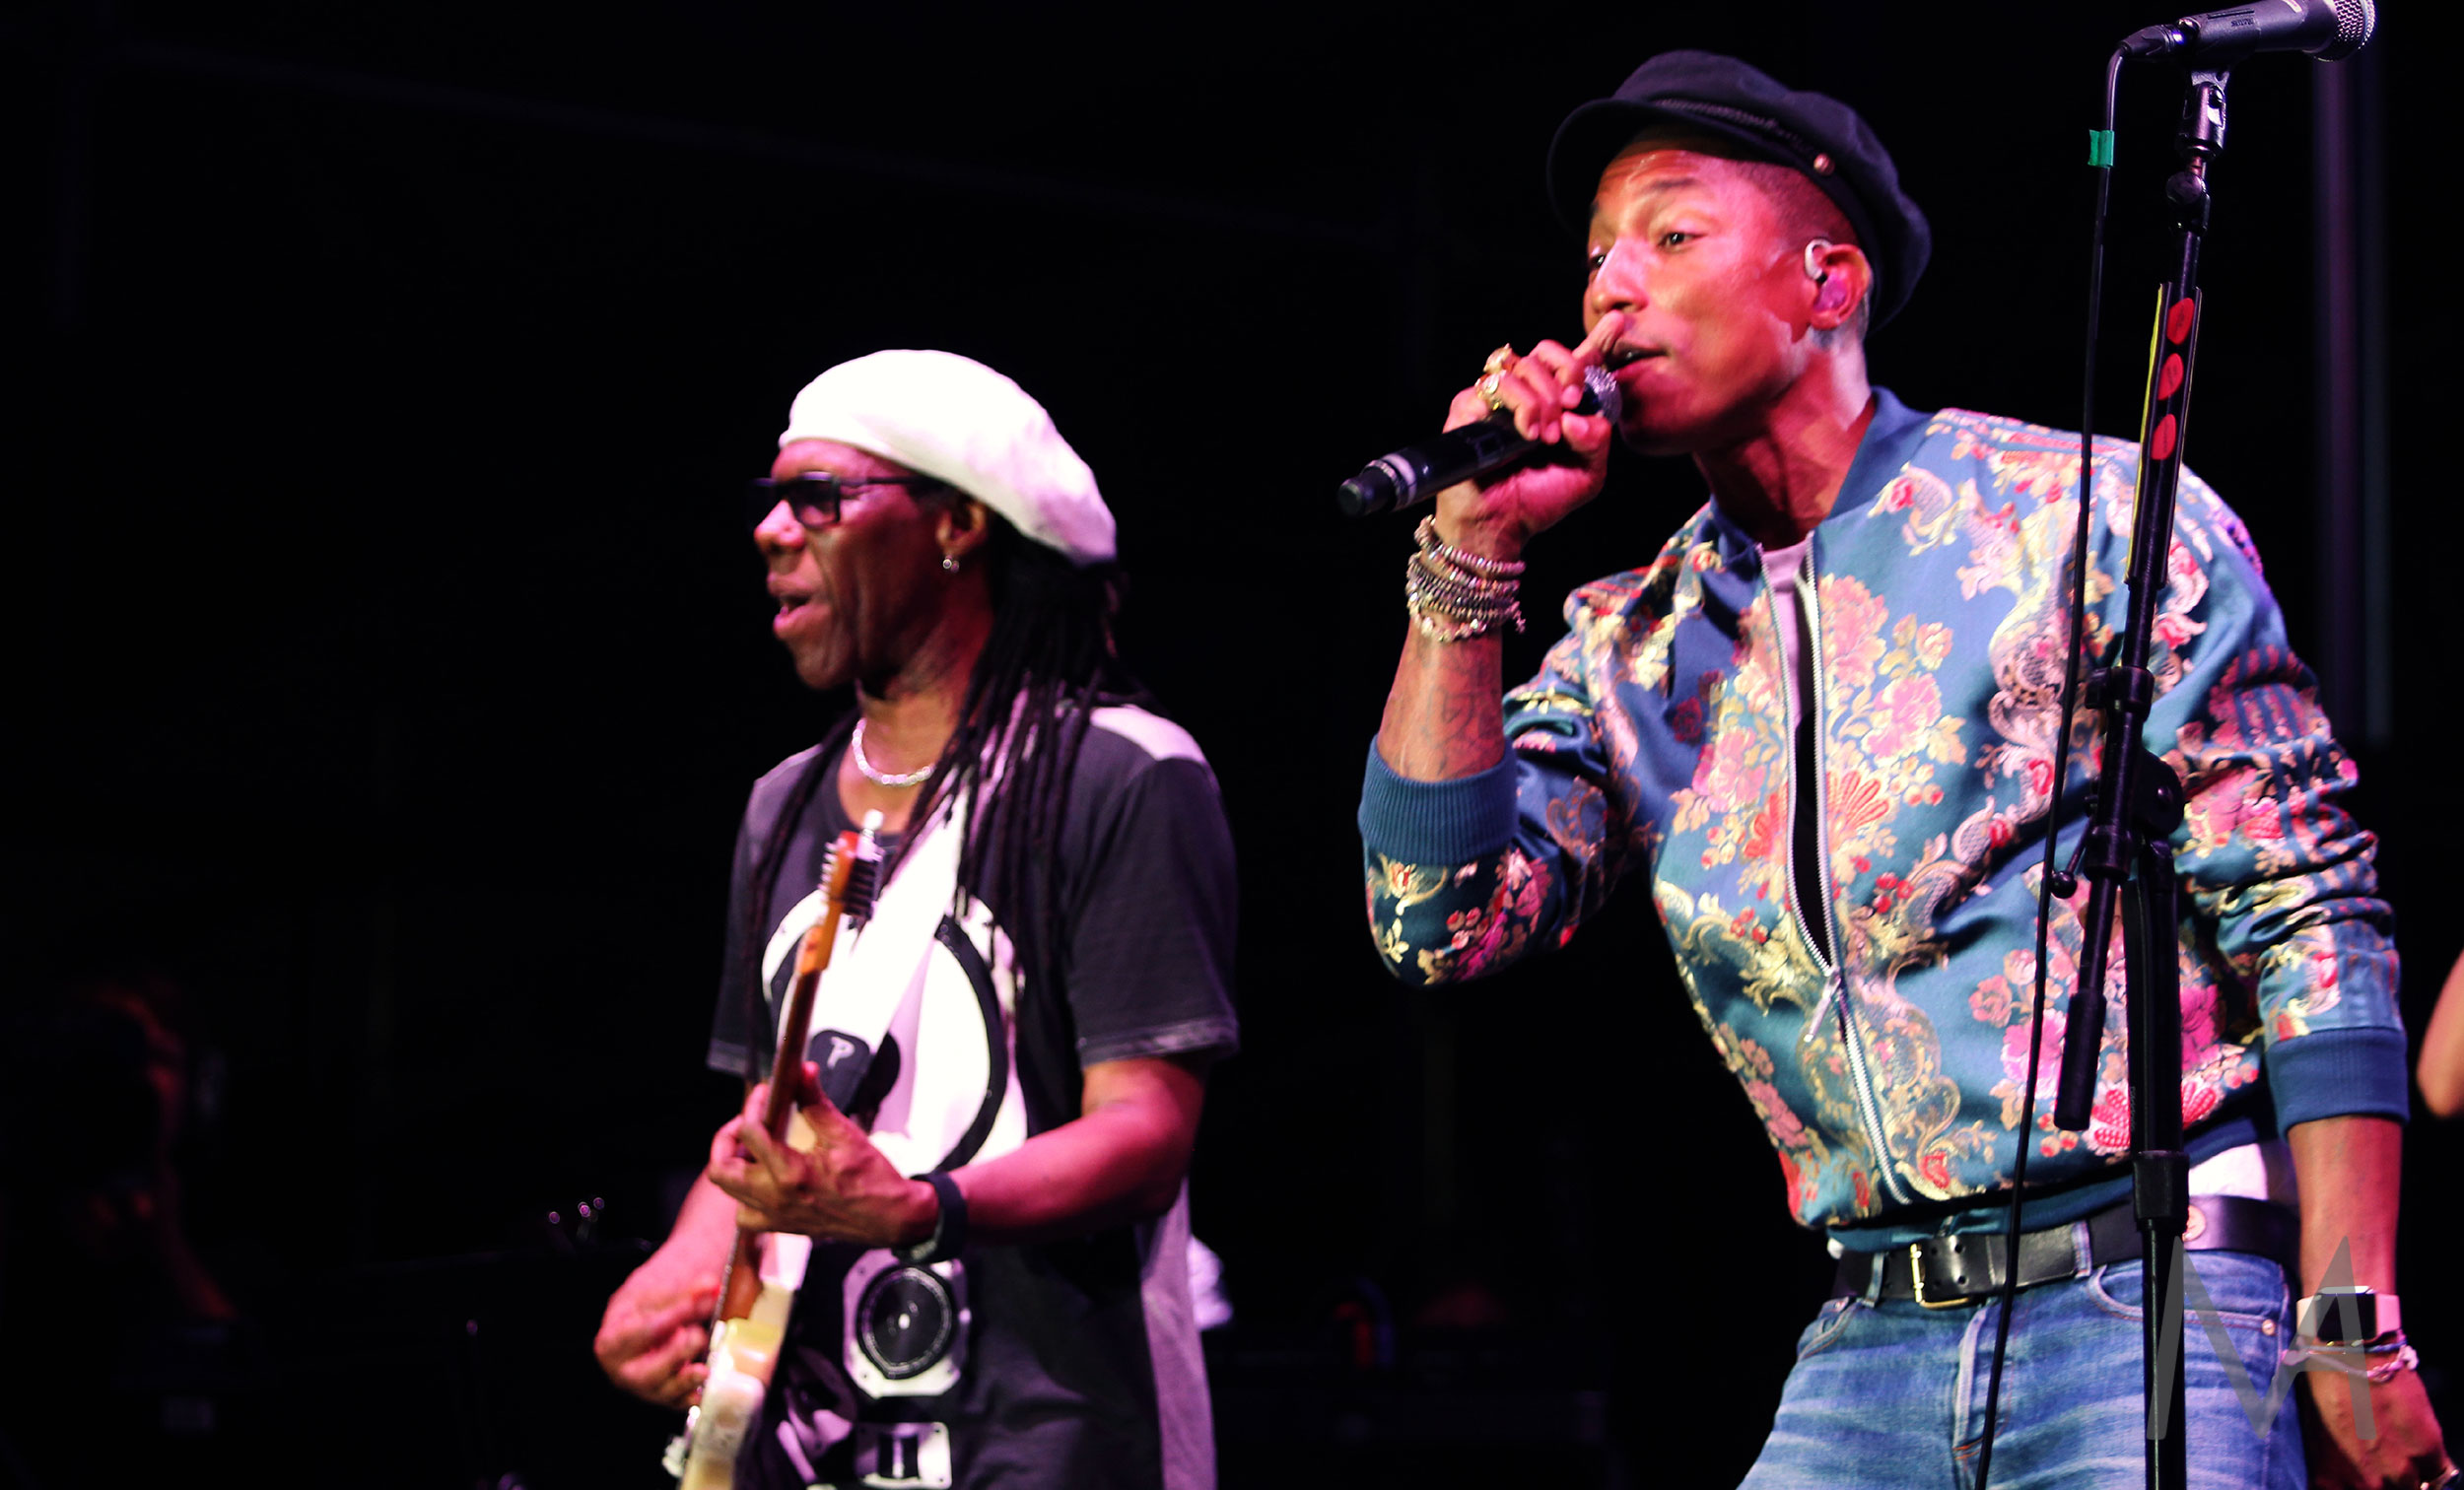 Nile Rodgers and Pharrell Williams